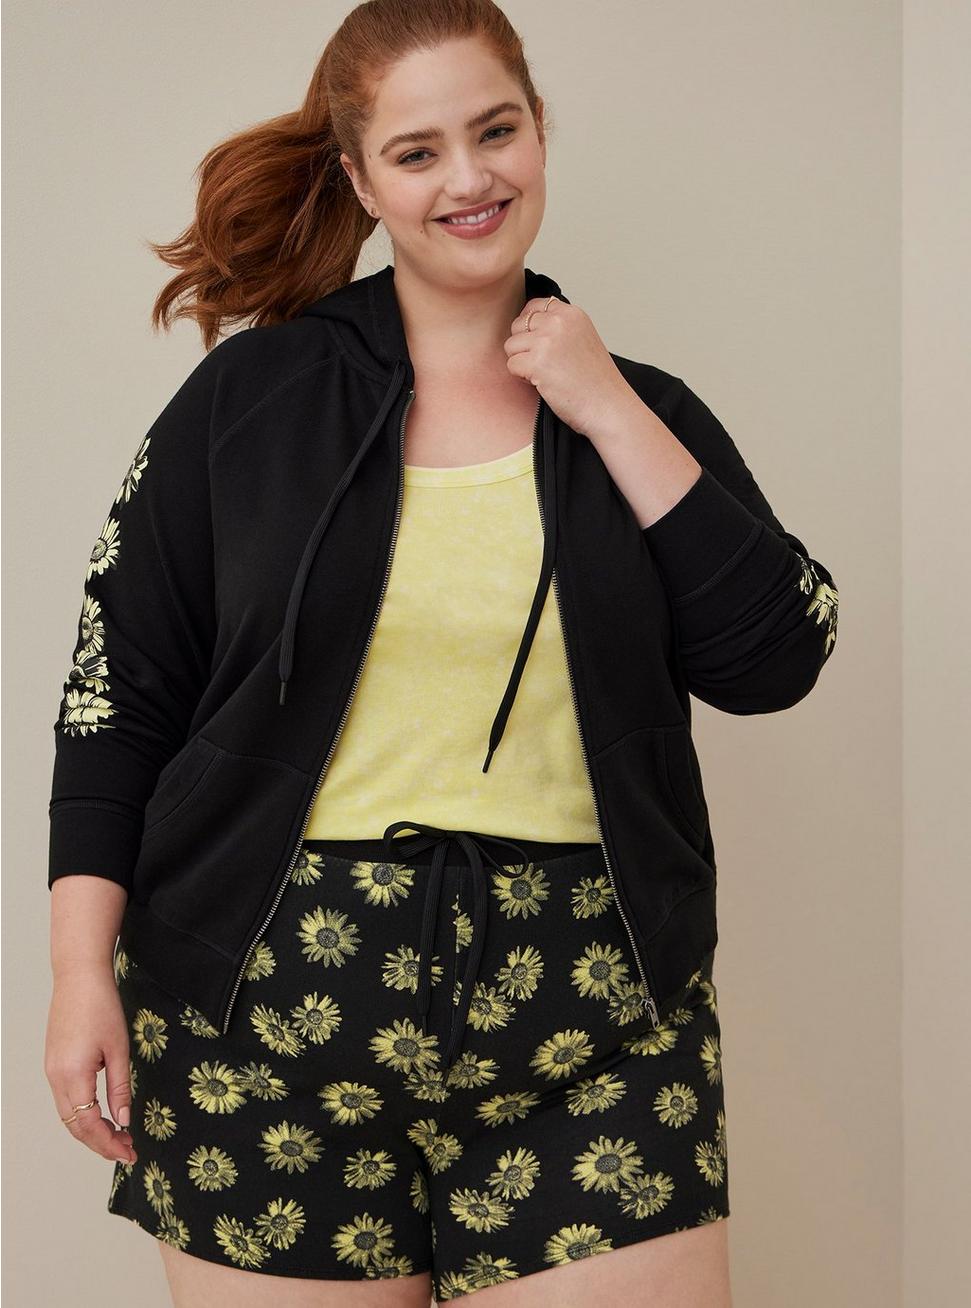 Plus Size LoveSick Pull-On Short - French Terry Daisy Black, BLACK FLORAL, alternate